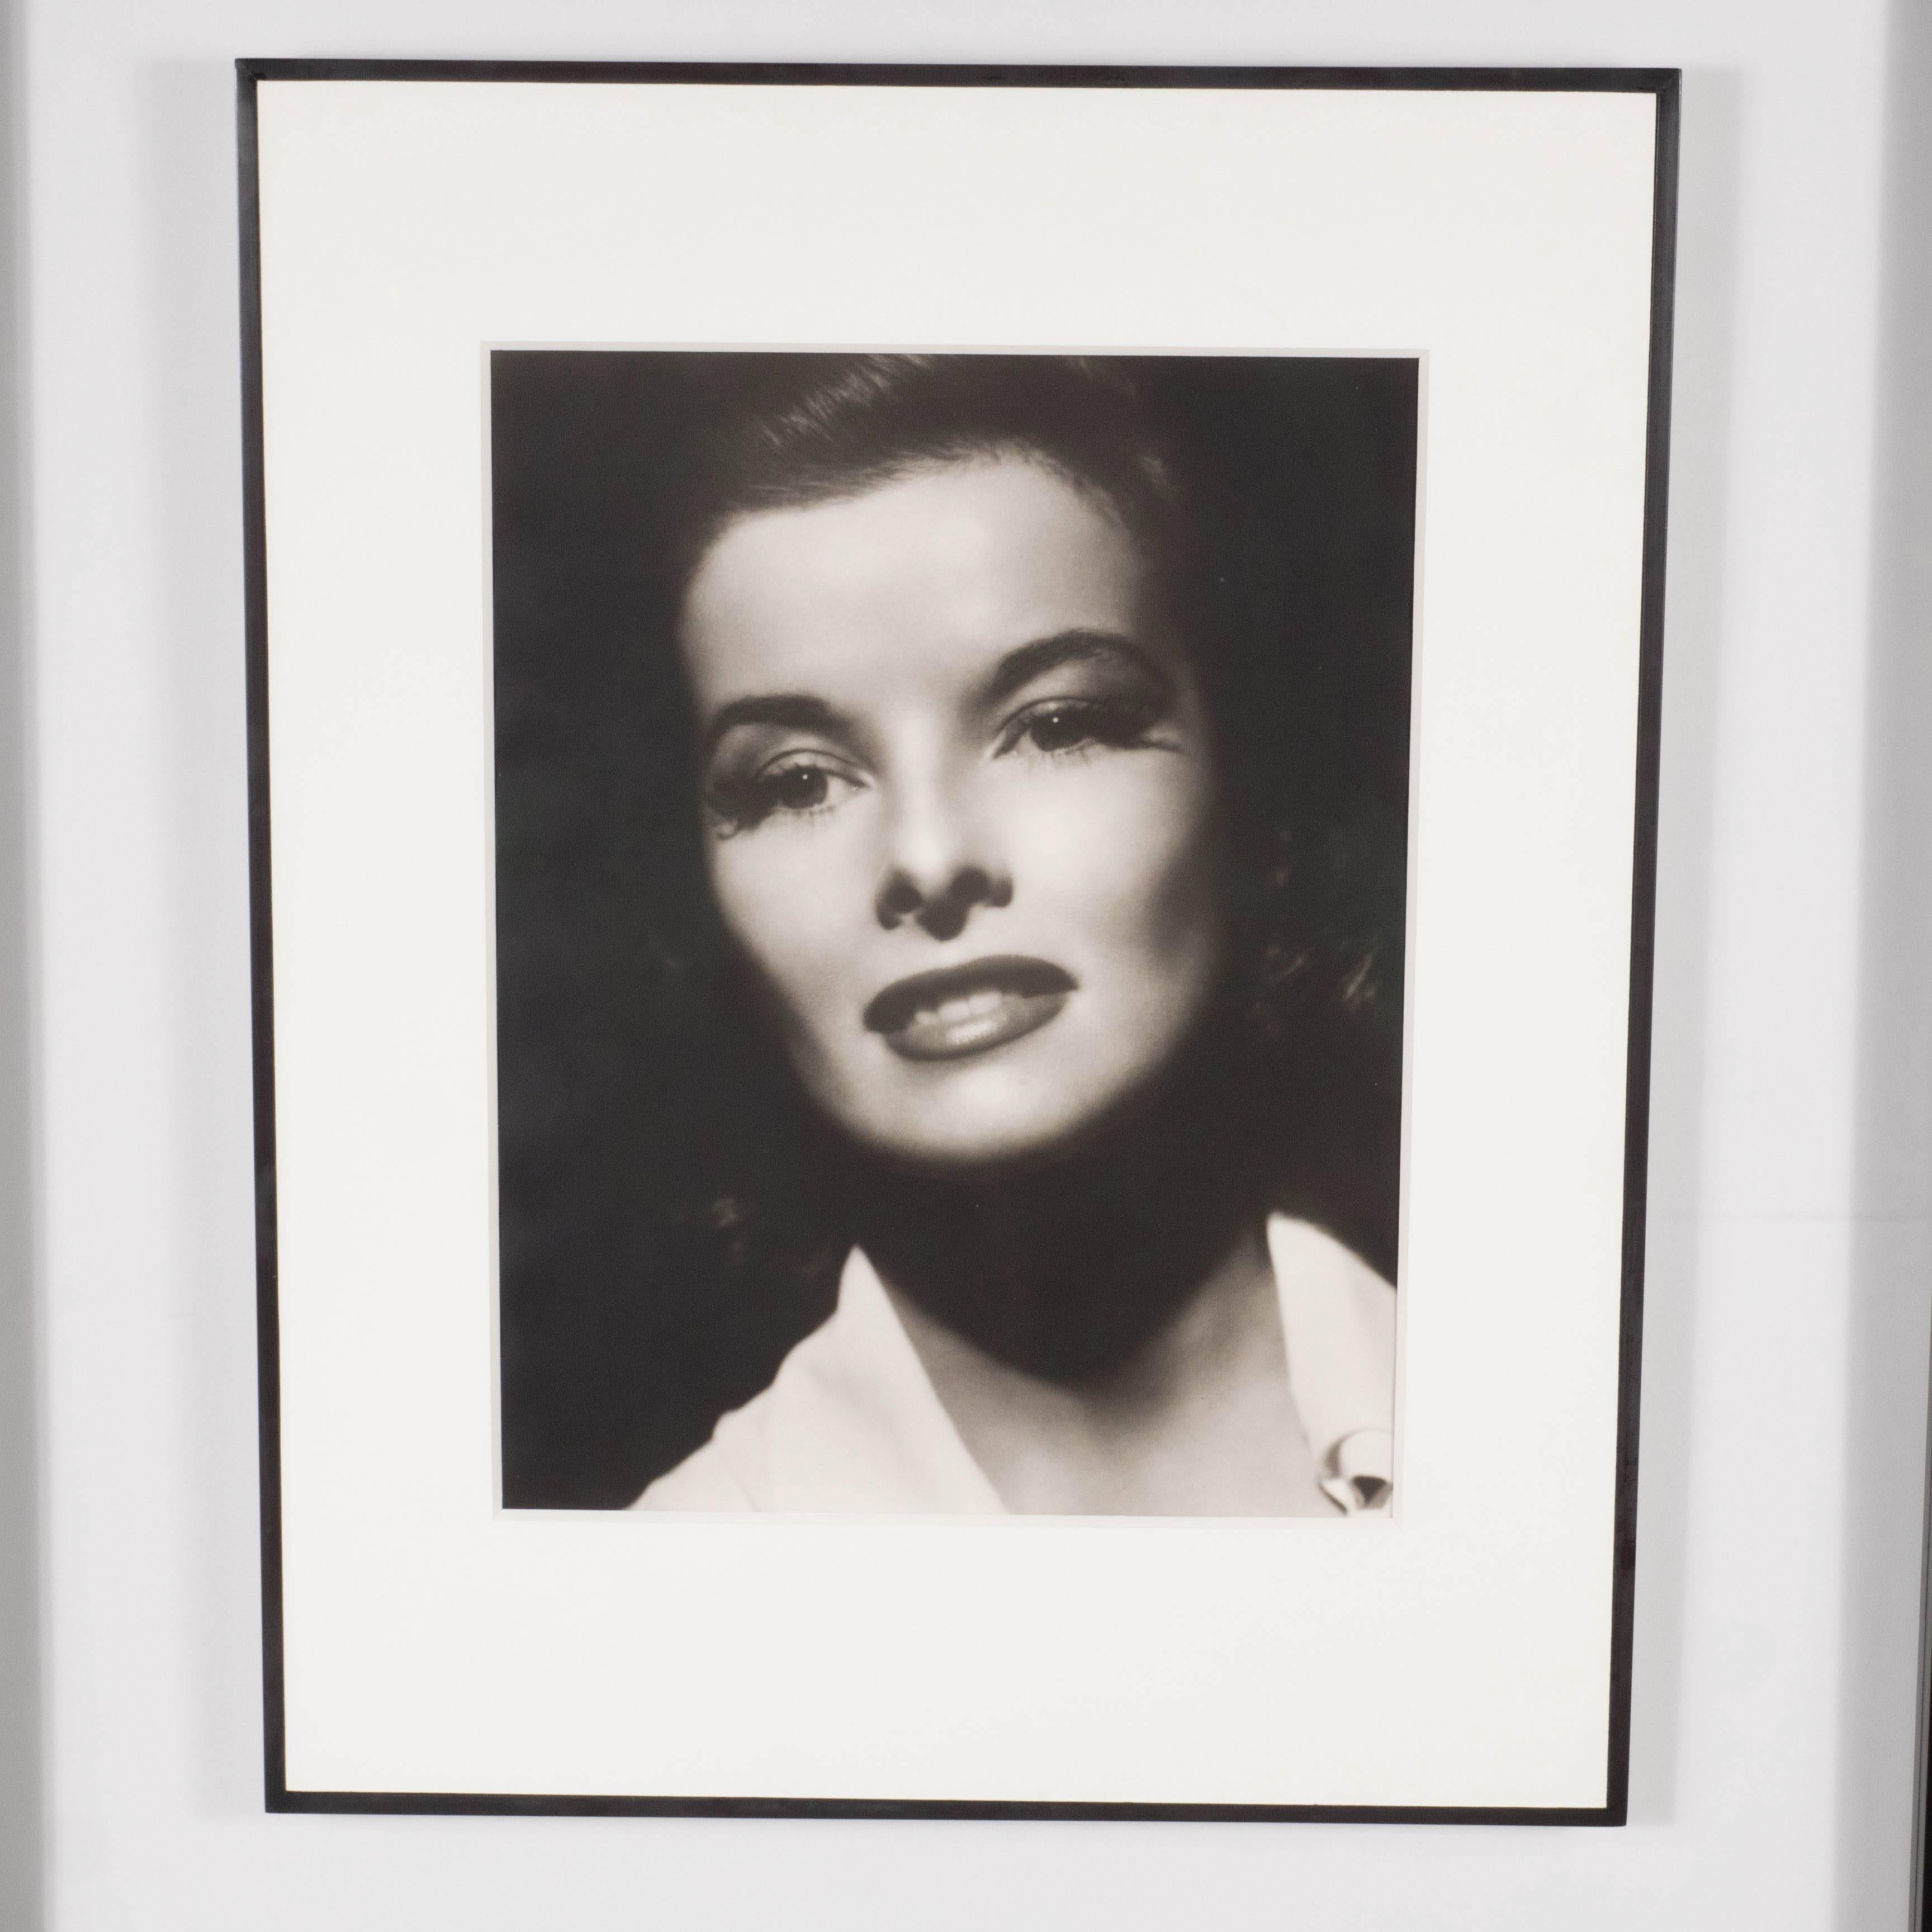 An original gelatin silver print (Edition of 190) made from the original negative by George Hurrell.

This piece was hand-developed, dodged and burned by or under the personal direction of George Hurrell. This edition was published at the